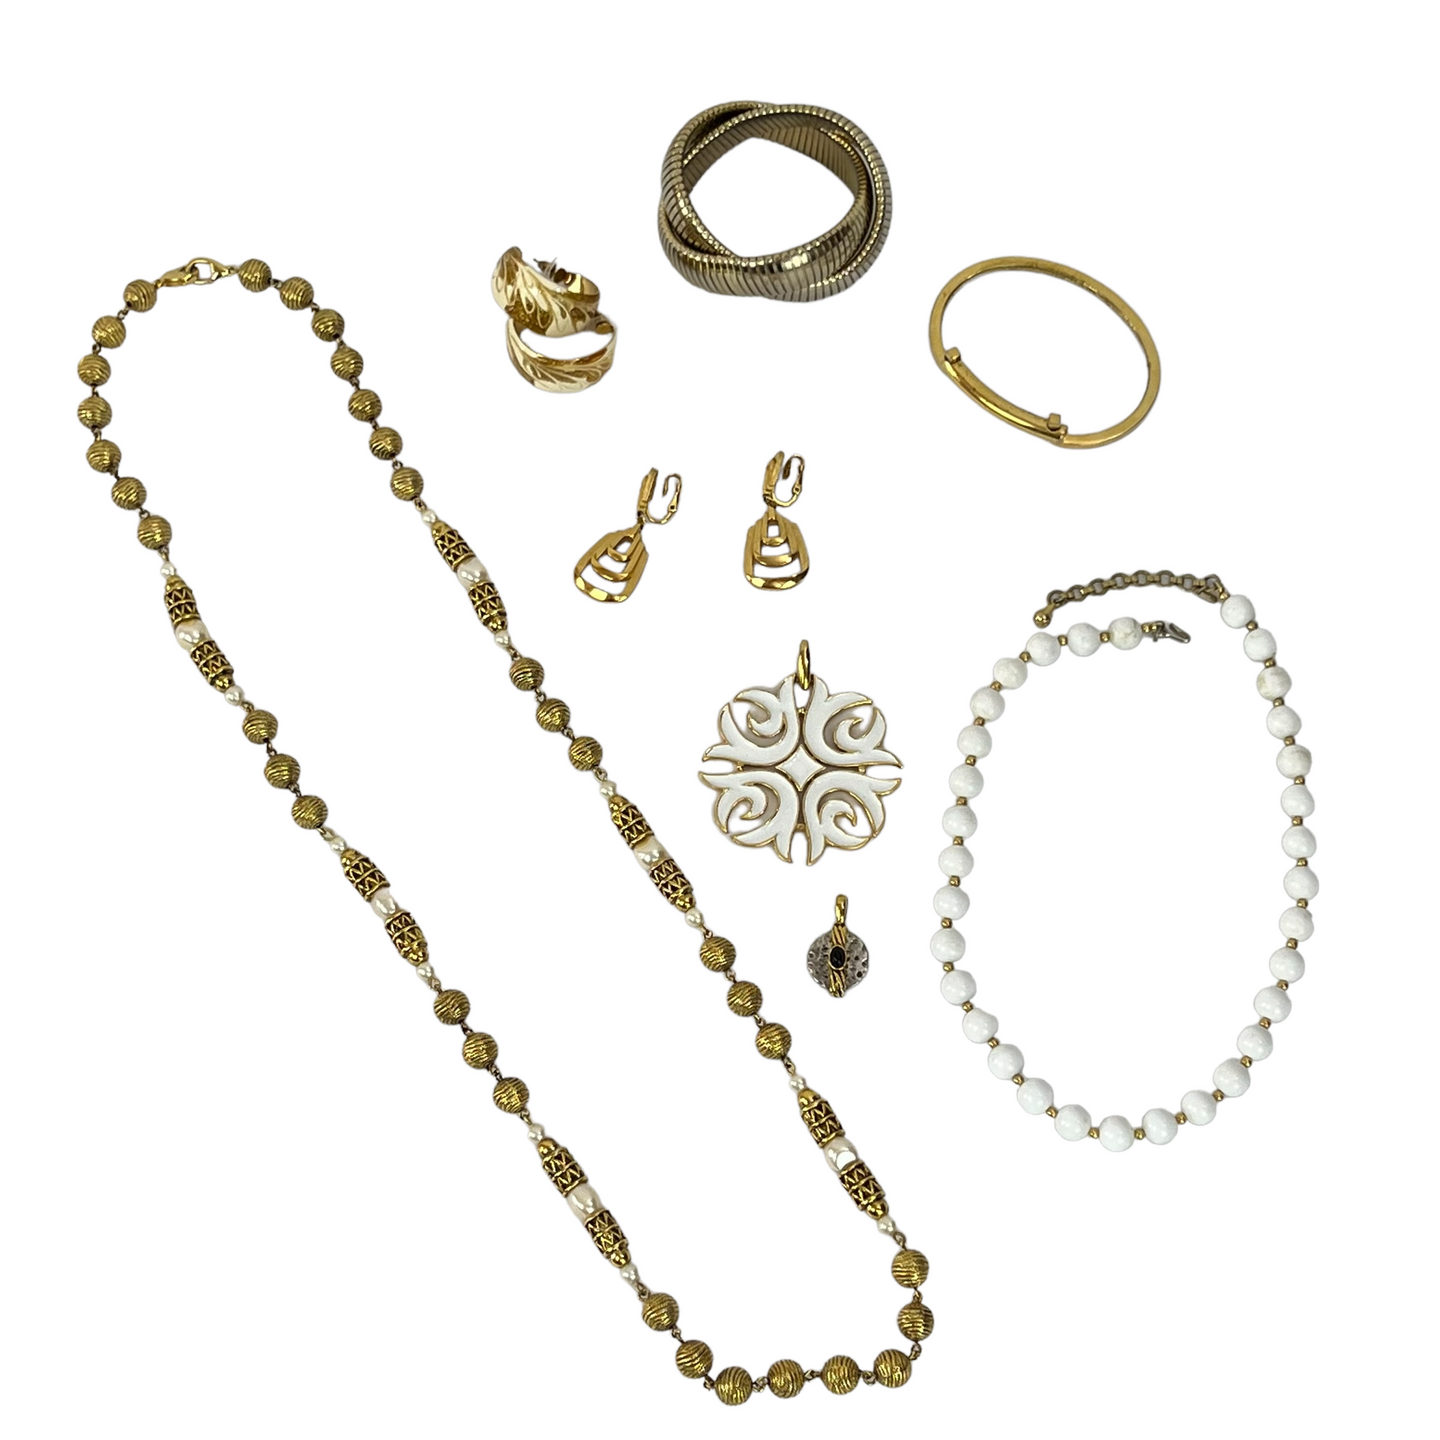 Vintage Jewelry Grab Bag includes 1 pair of gold clip on Trifari earrings, 1 pair of gold plate/white enamel hoop earrings, 1 white and gold Trifari pendant, 1 small round silver and gold tone pendant, 1 Monet white and gold bead necklace, 1 long gold tone and faux pearl beaded necklace and 2 gold tone bracelets. 